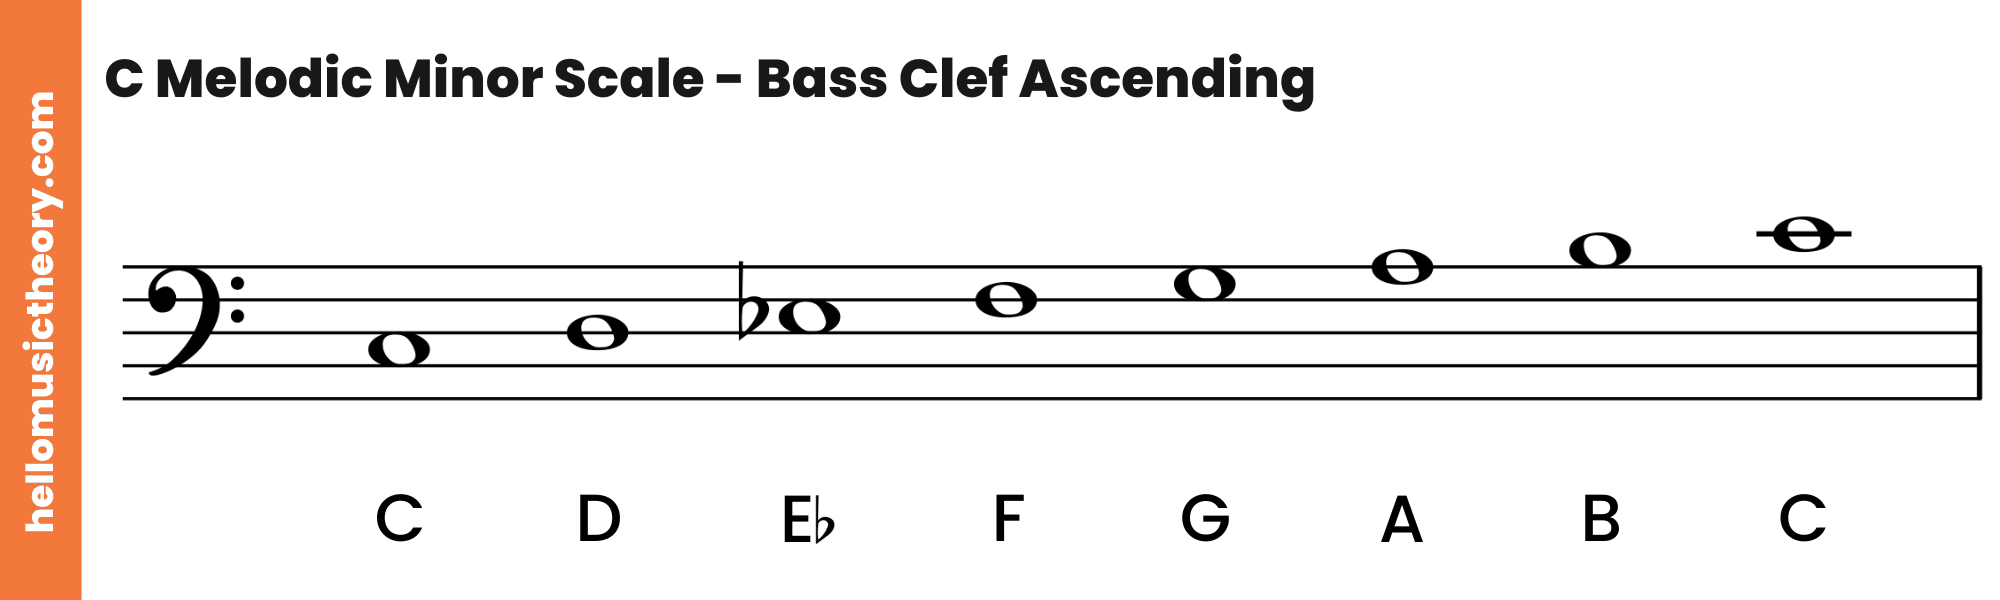 C Melodic Minor Scale Bass Clef Ascending